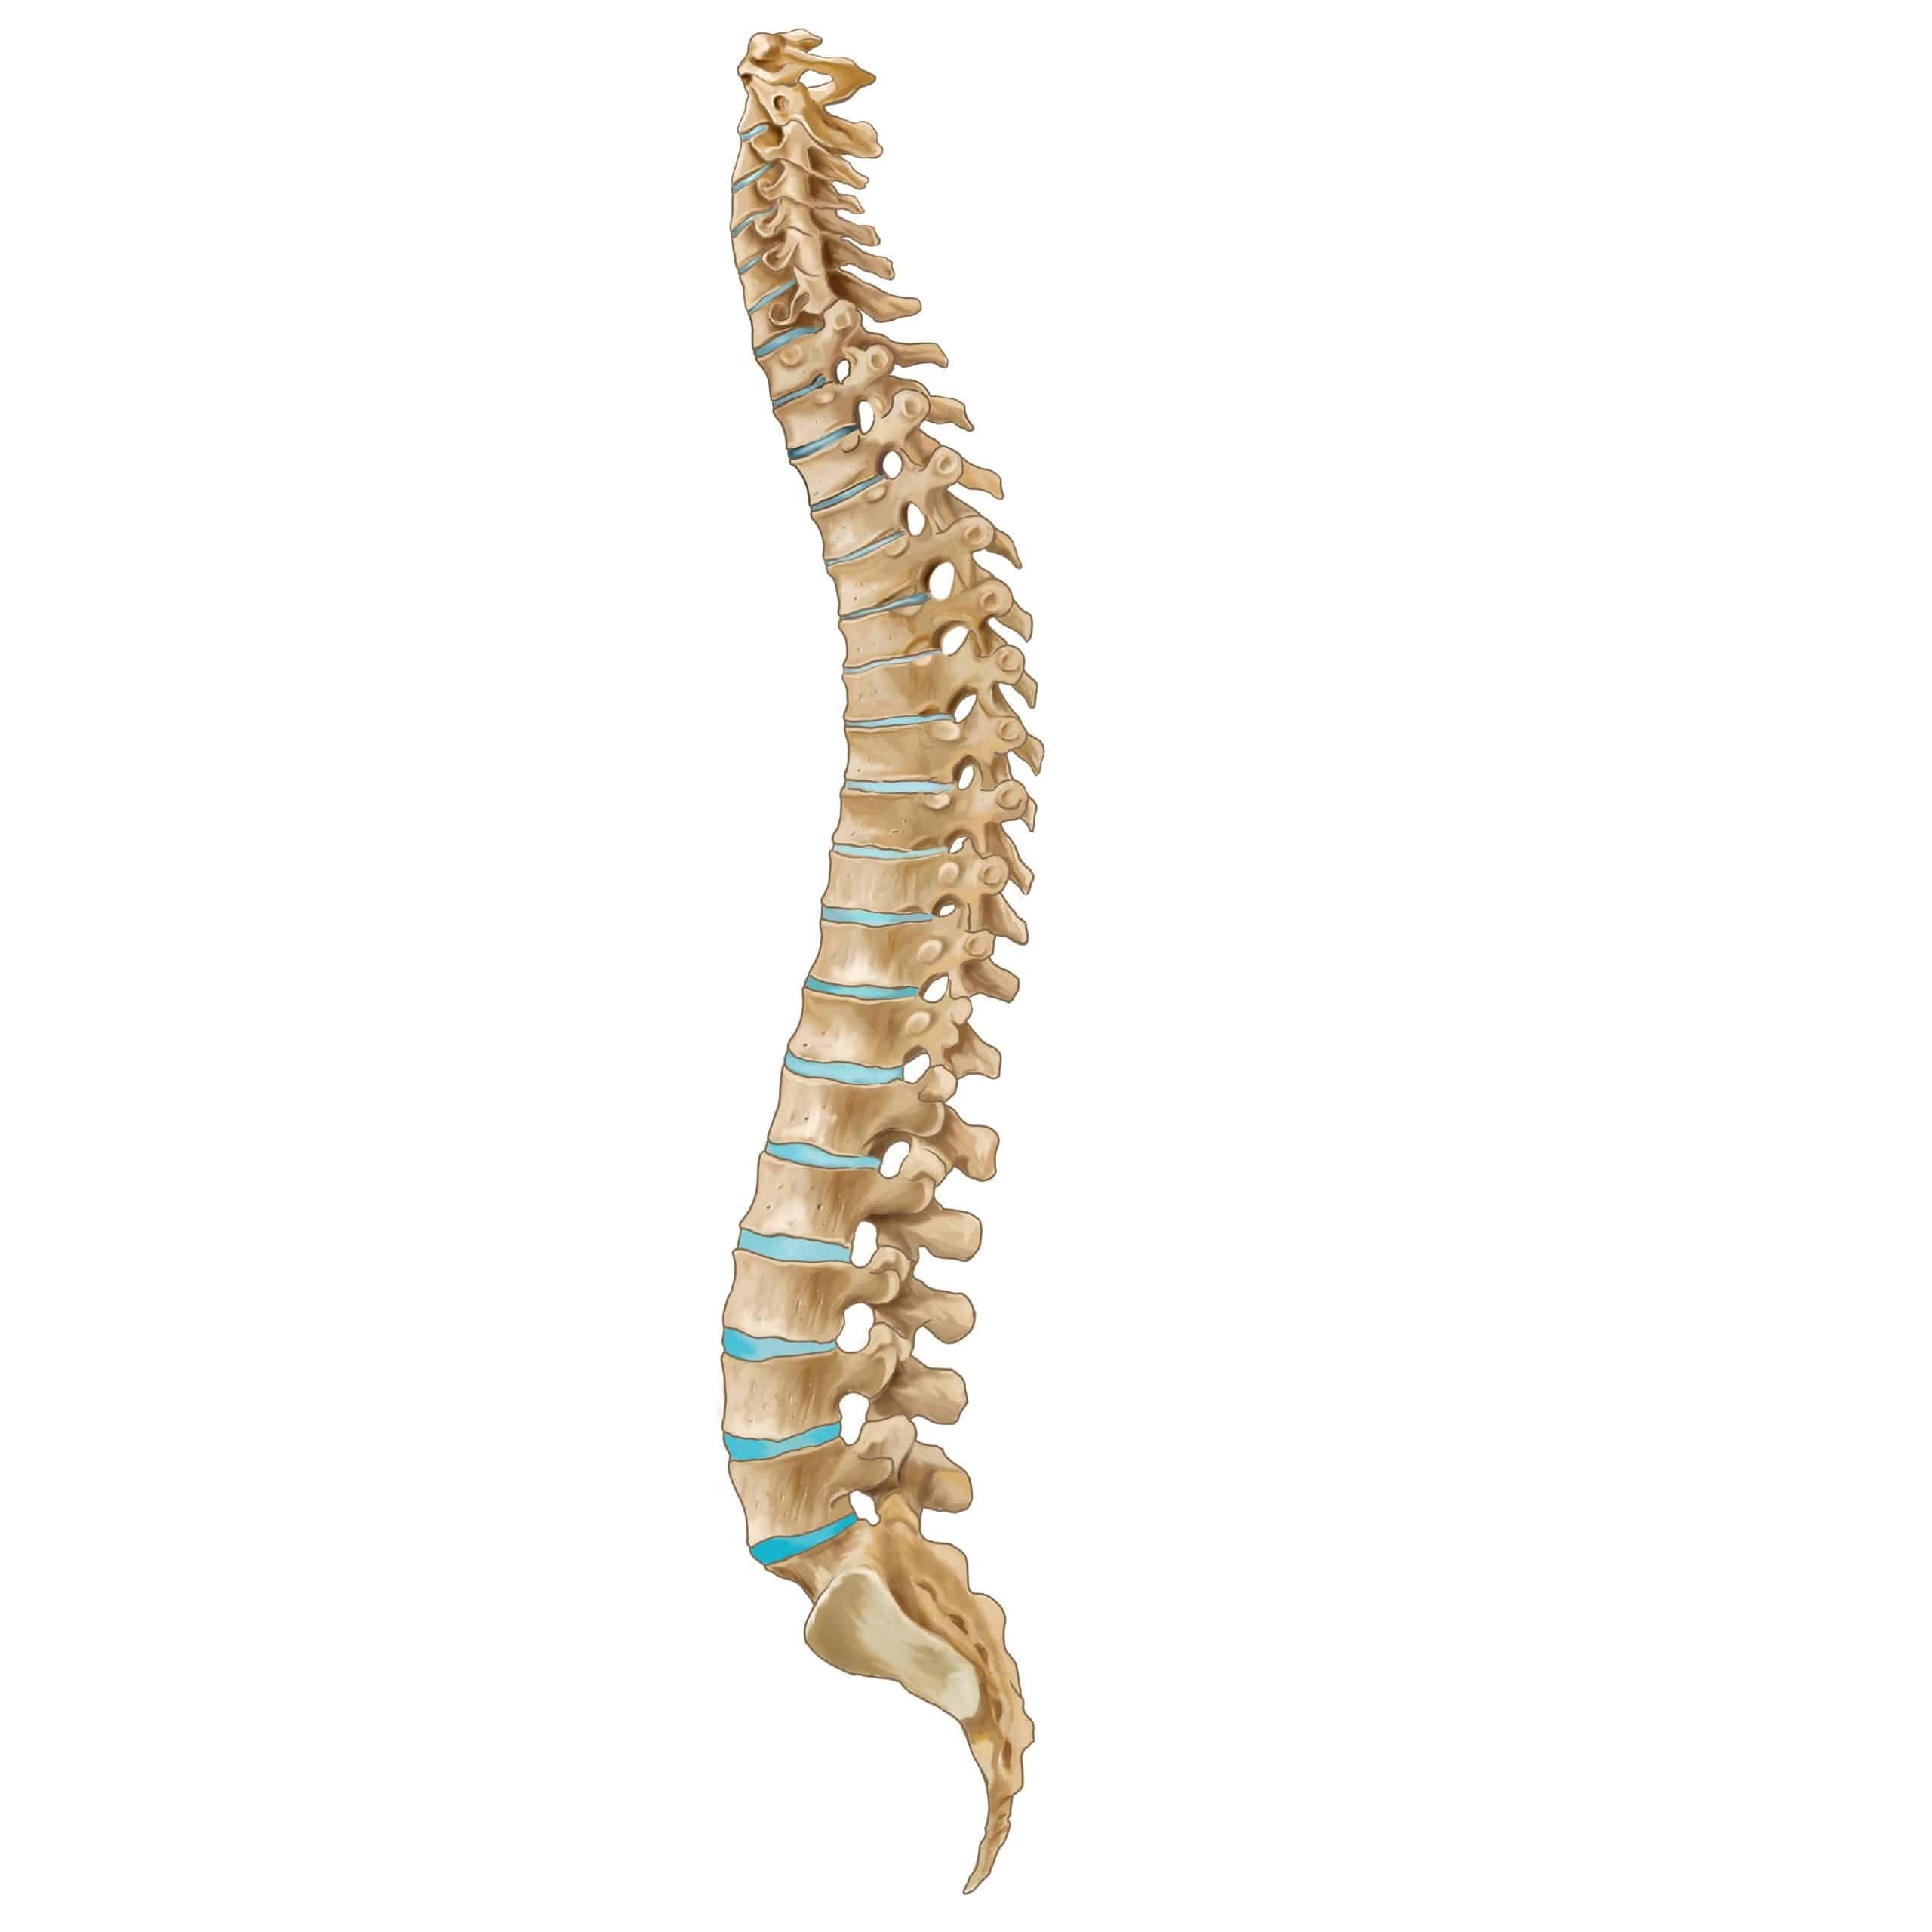 spinal cord therapies